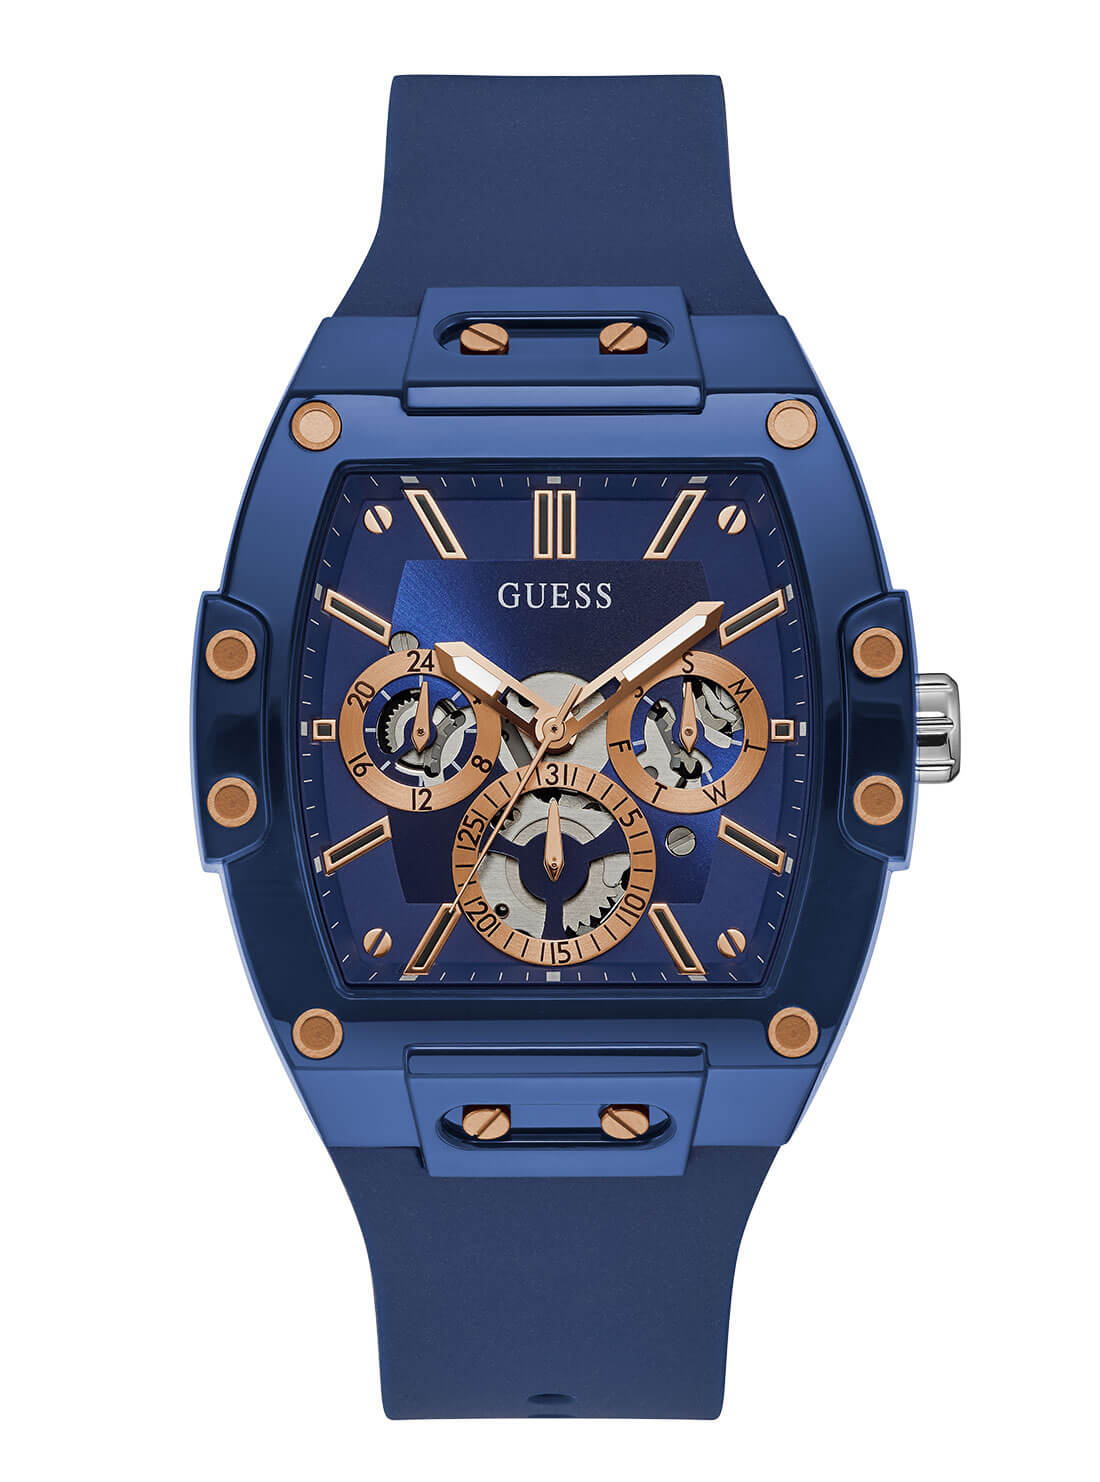 GUESS Mens Blue Phoenix Silicone Watch GW0203G7 Front View